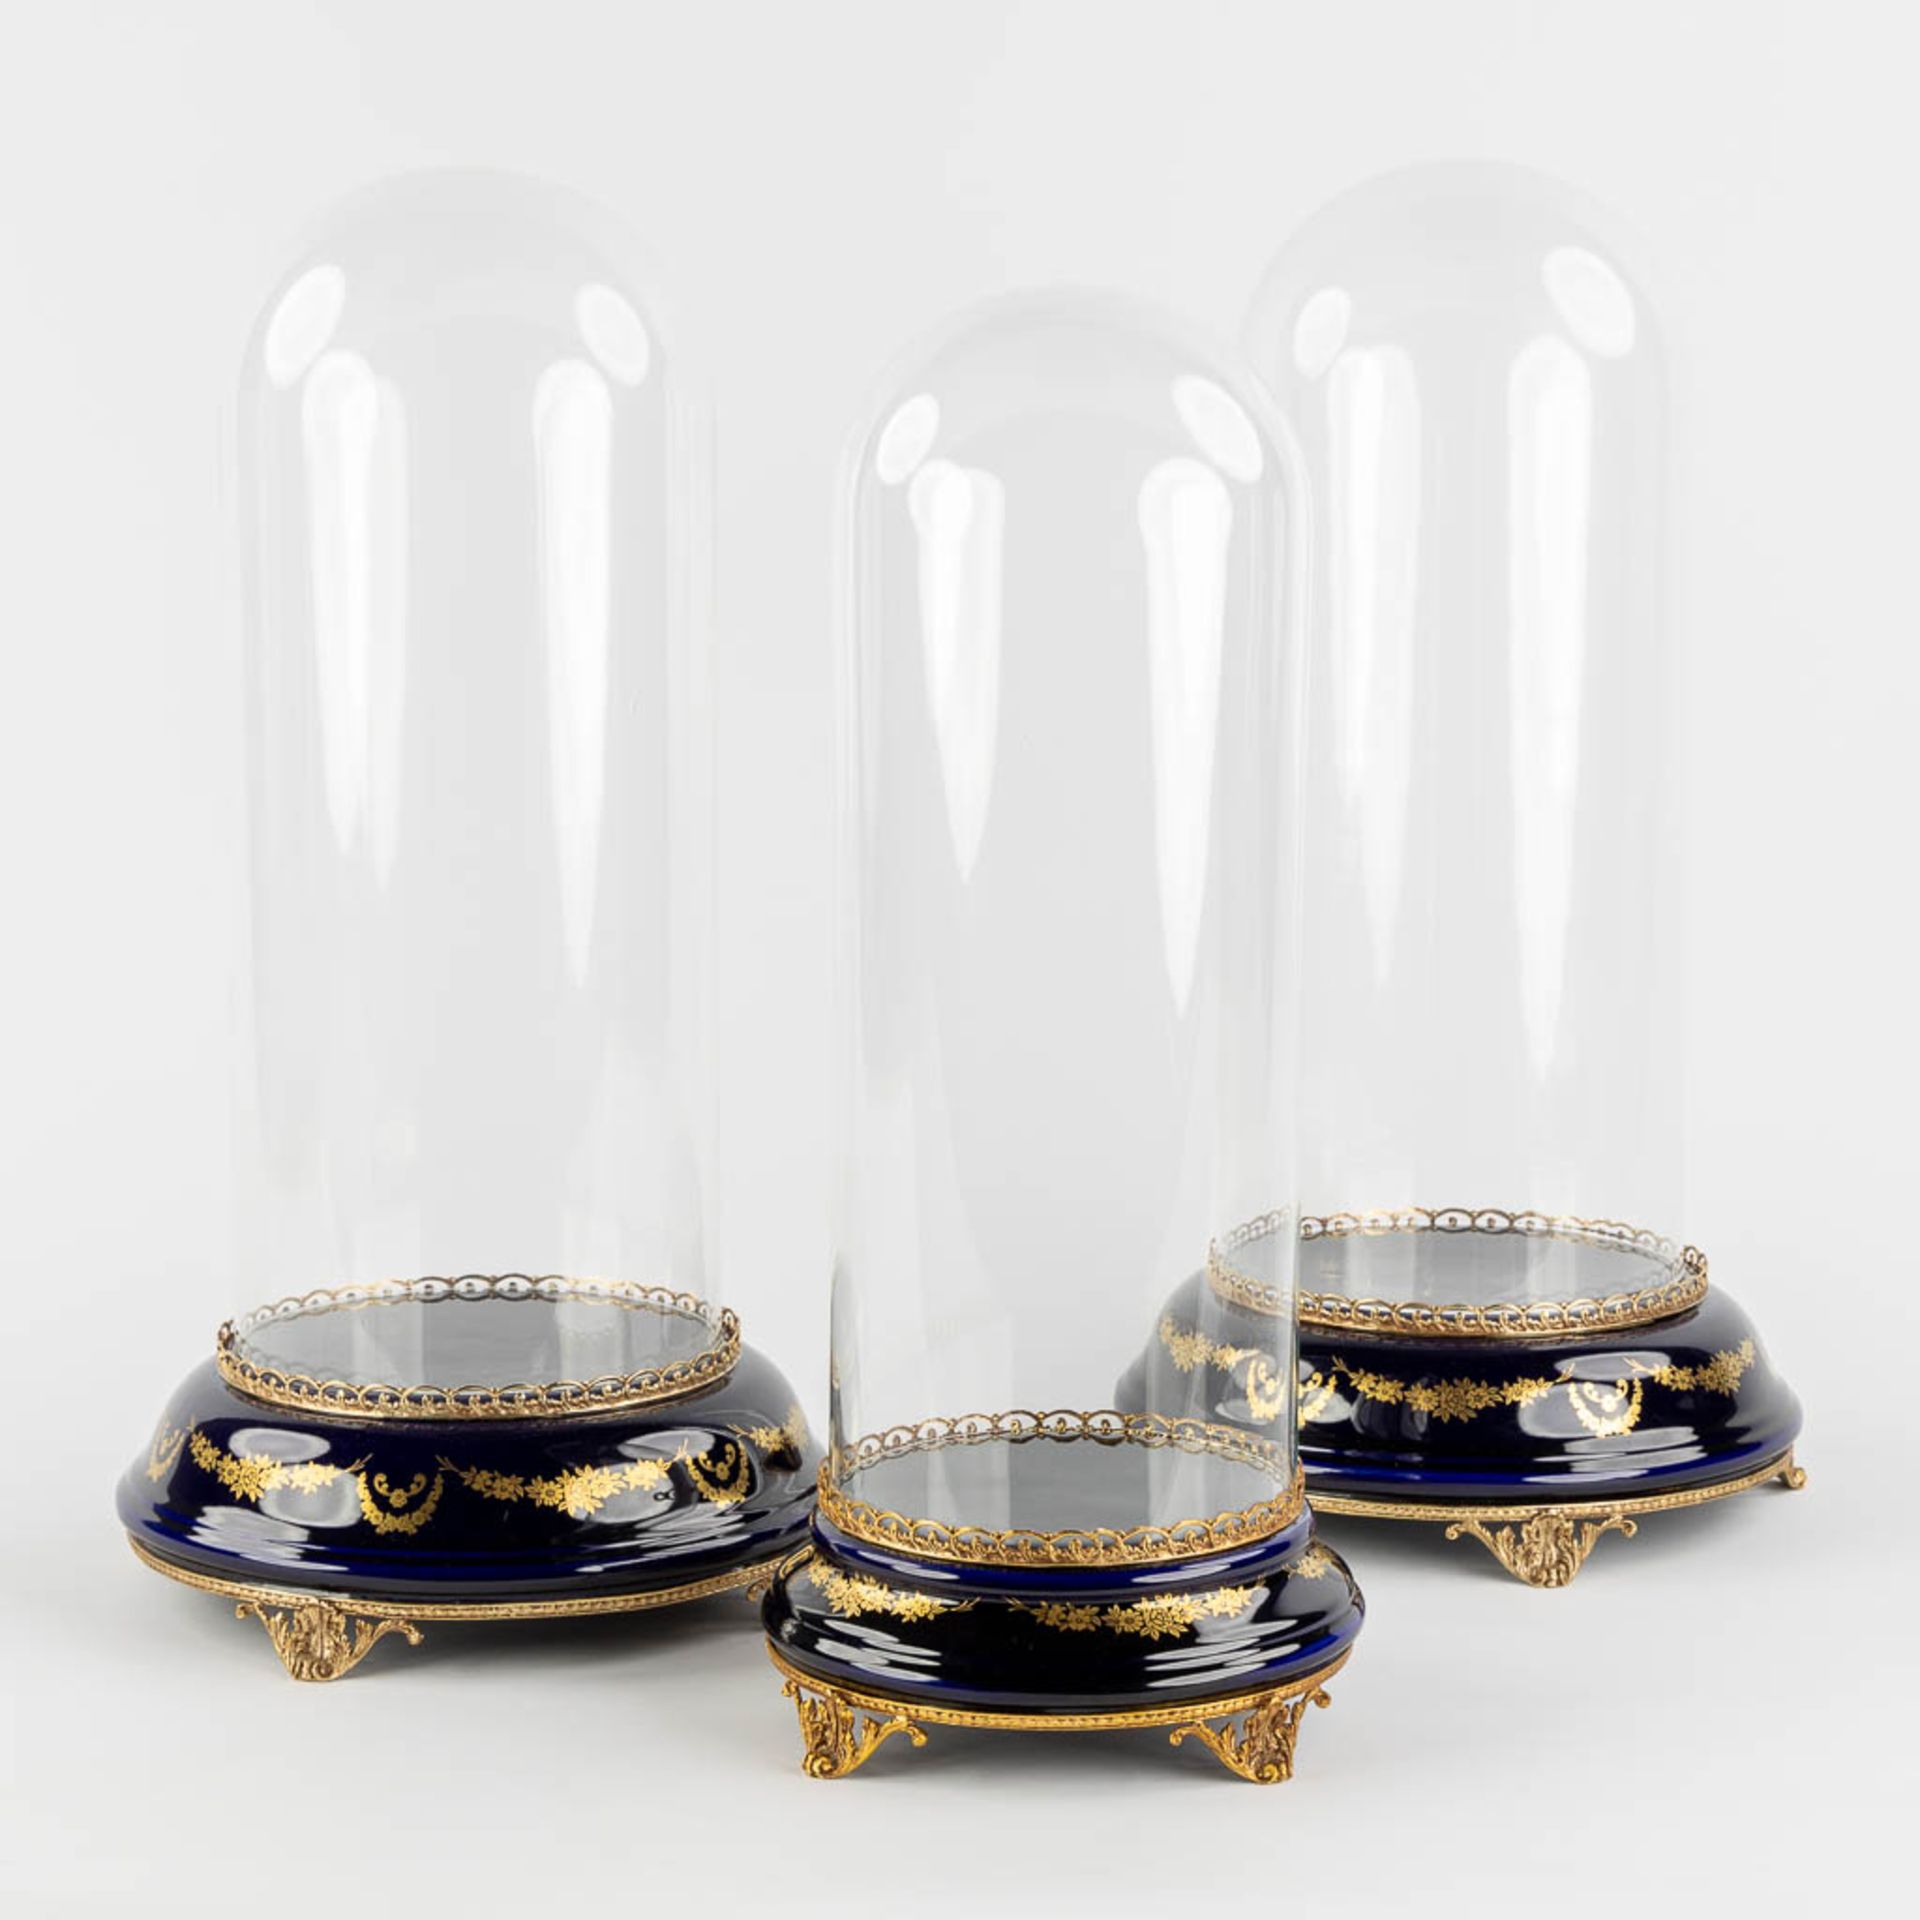 Mignon Limoges, three domes and their bases with a hand-painted decor. (H:49 x D:26,5 cm)